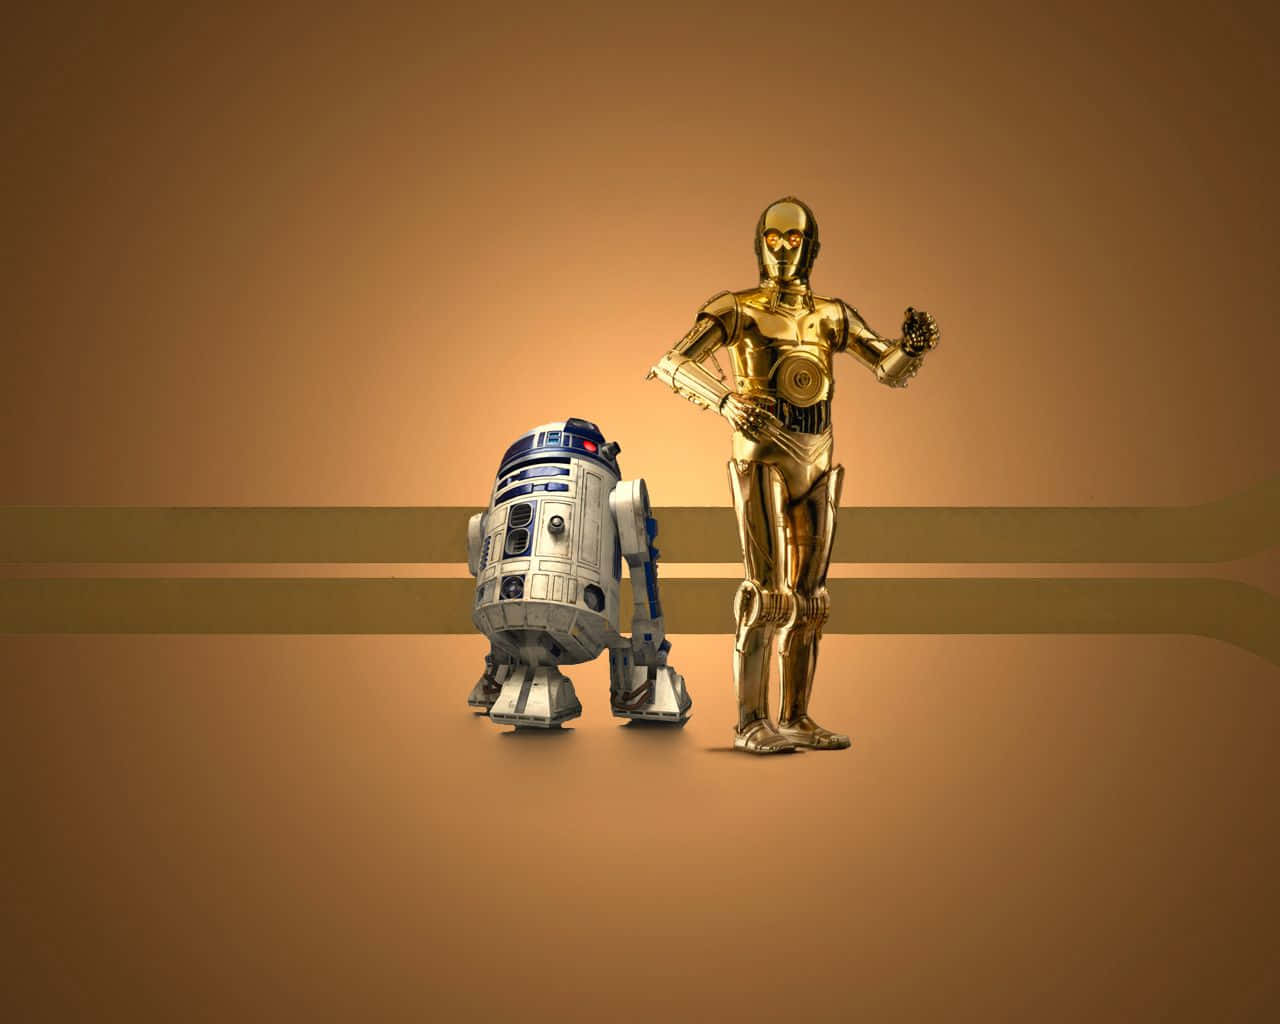 The iconic C-3PO droid from the Star Wars universe. Wallpaper